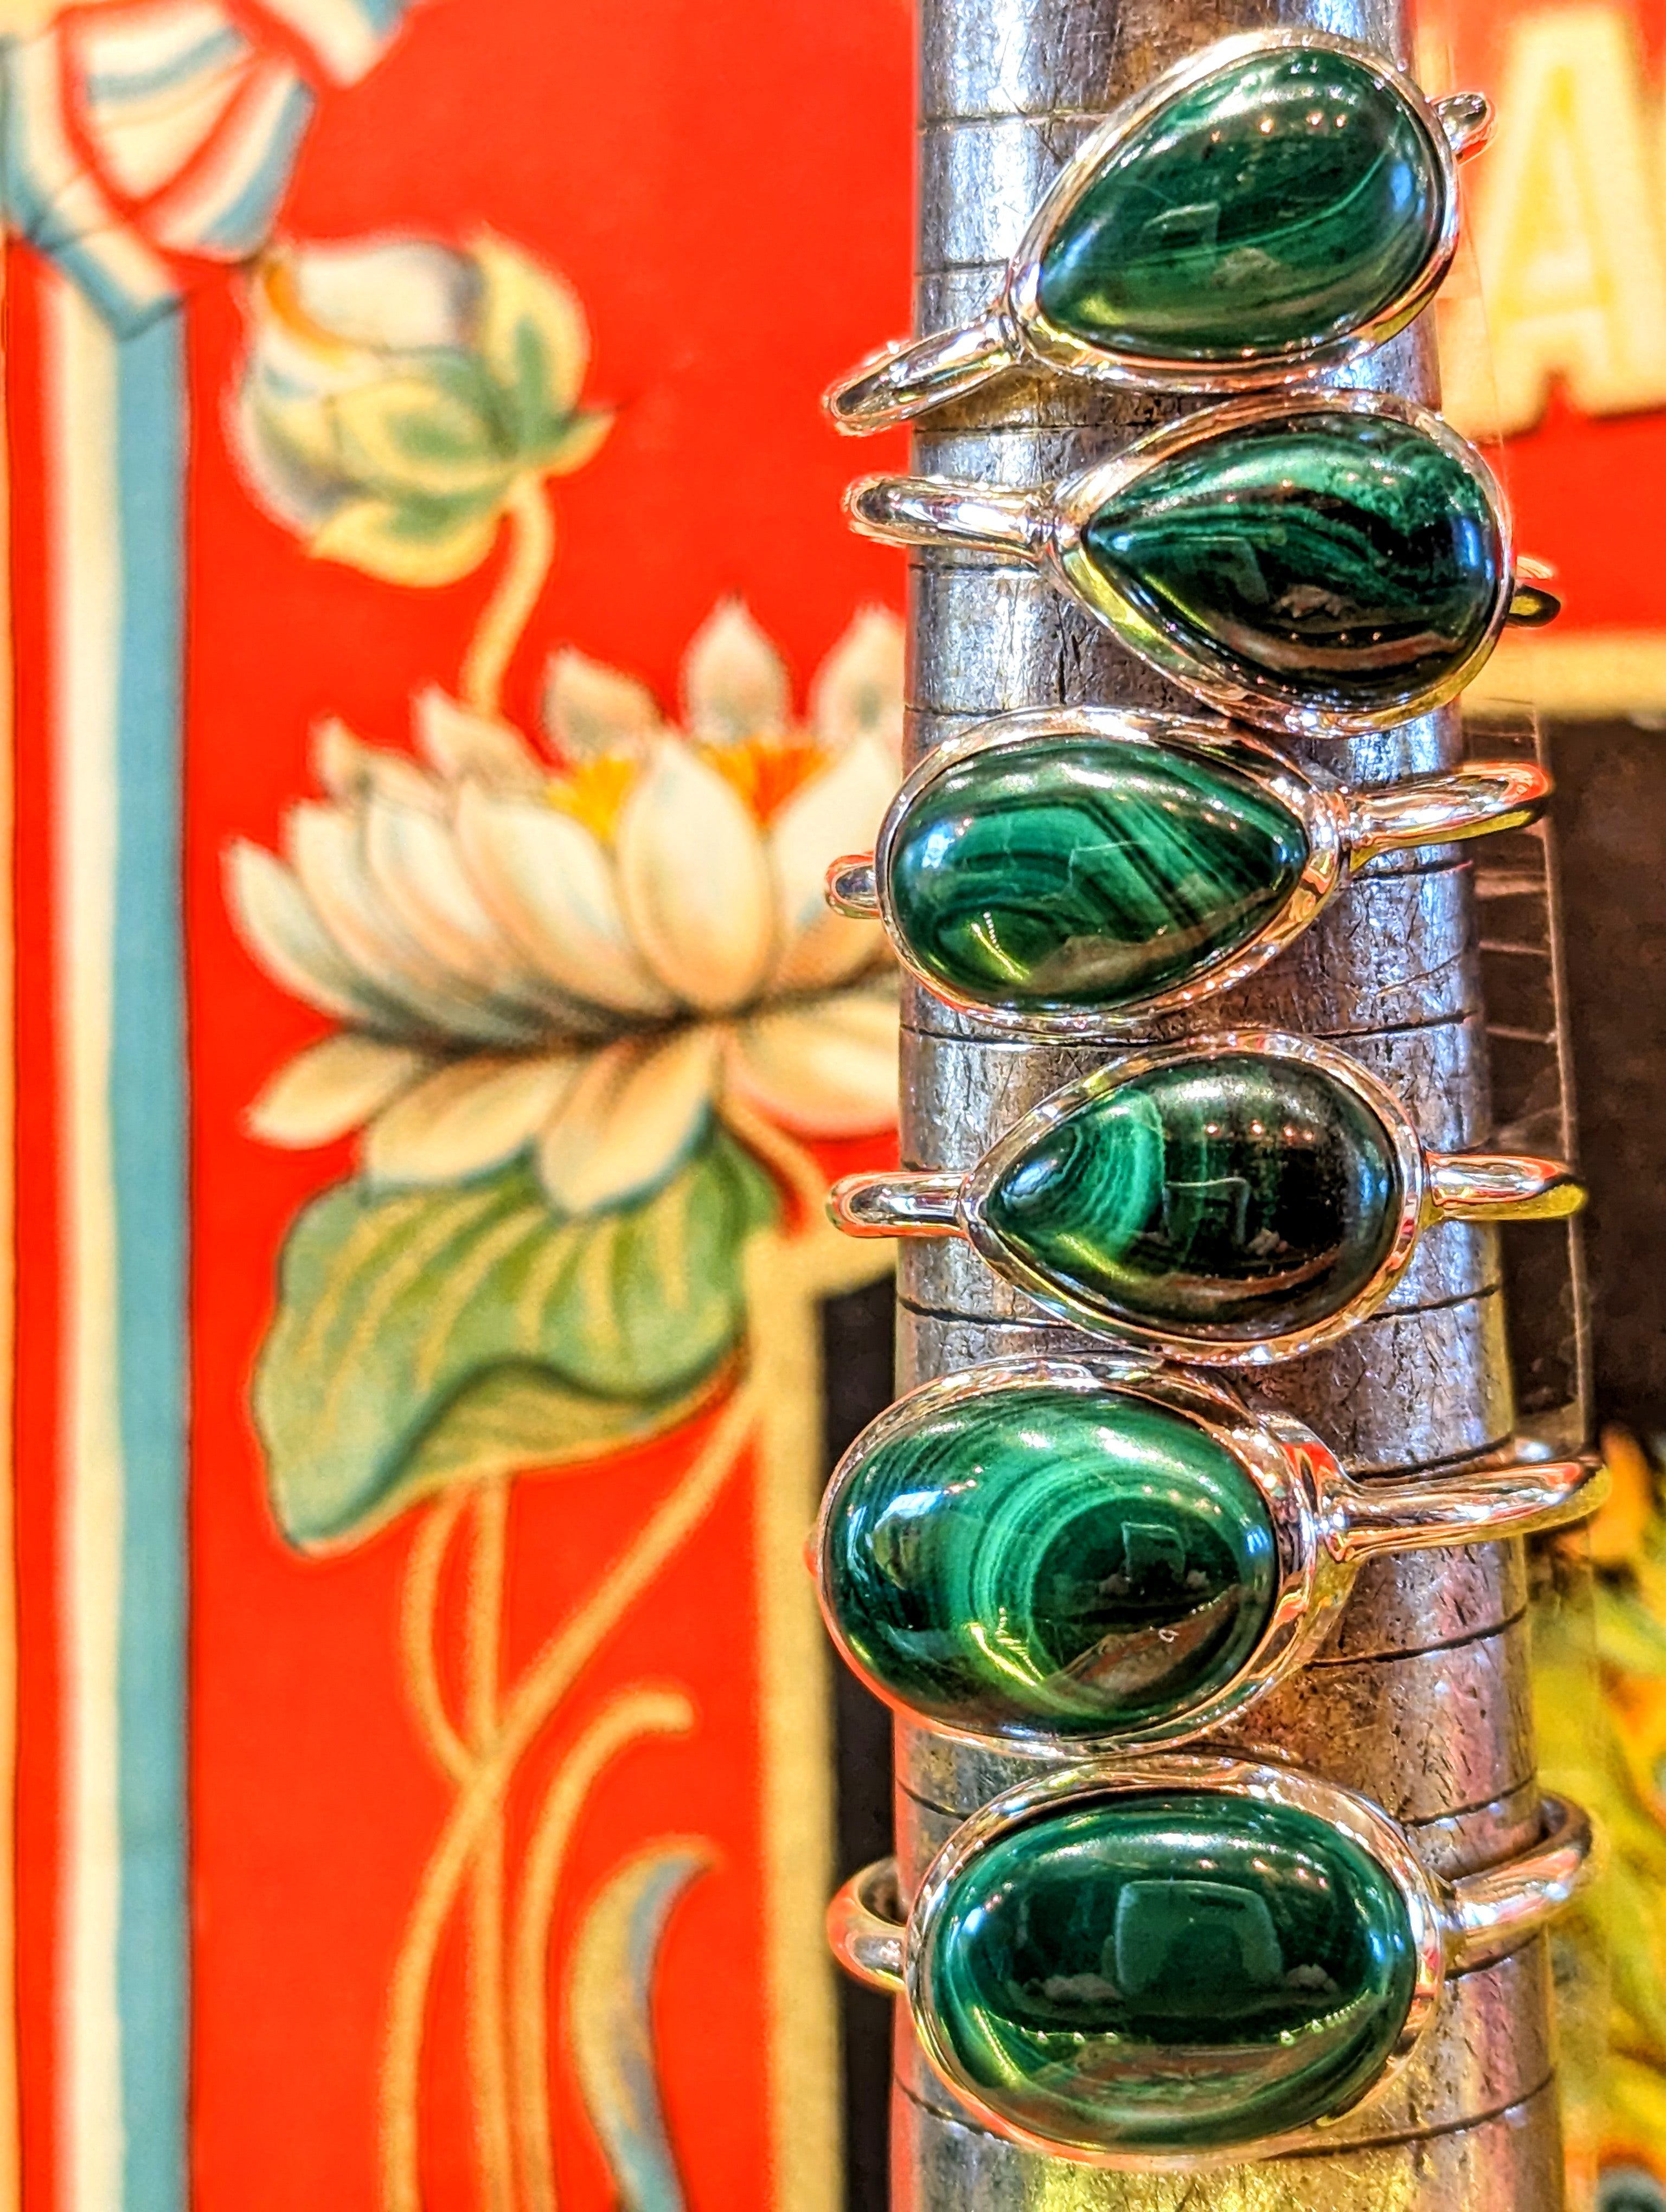 Stunning malachite cabochons in silver, stunning stripes and depth of colour.

We source stones directly, choosing every one to be made into rings in India, such a juicy job!

Rings are numbered from the top to the bottom.

